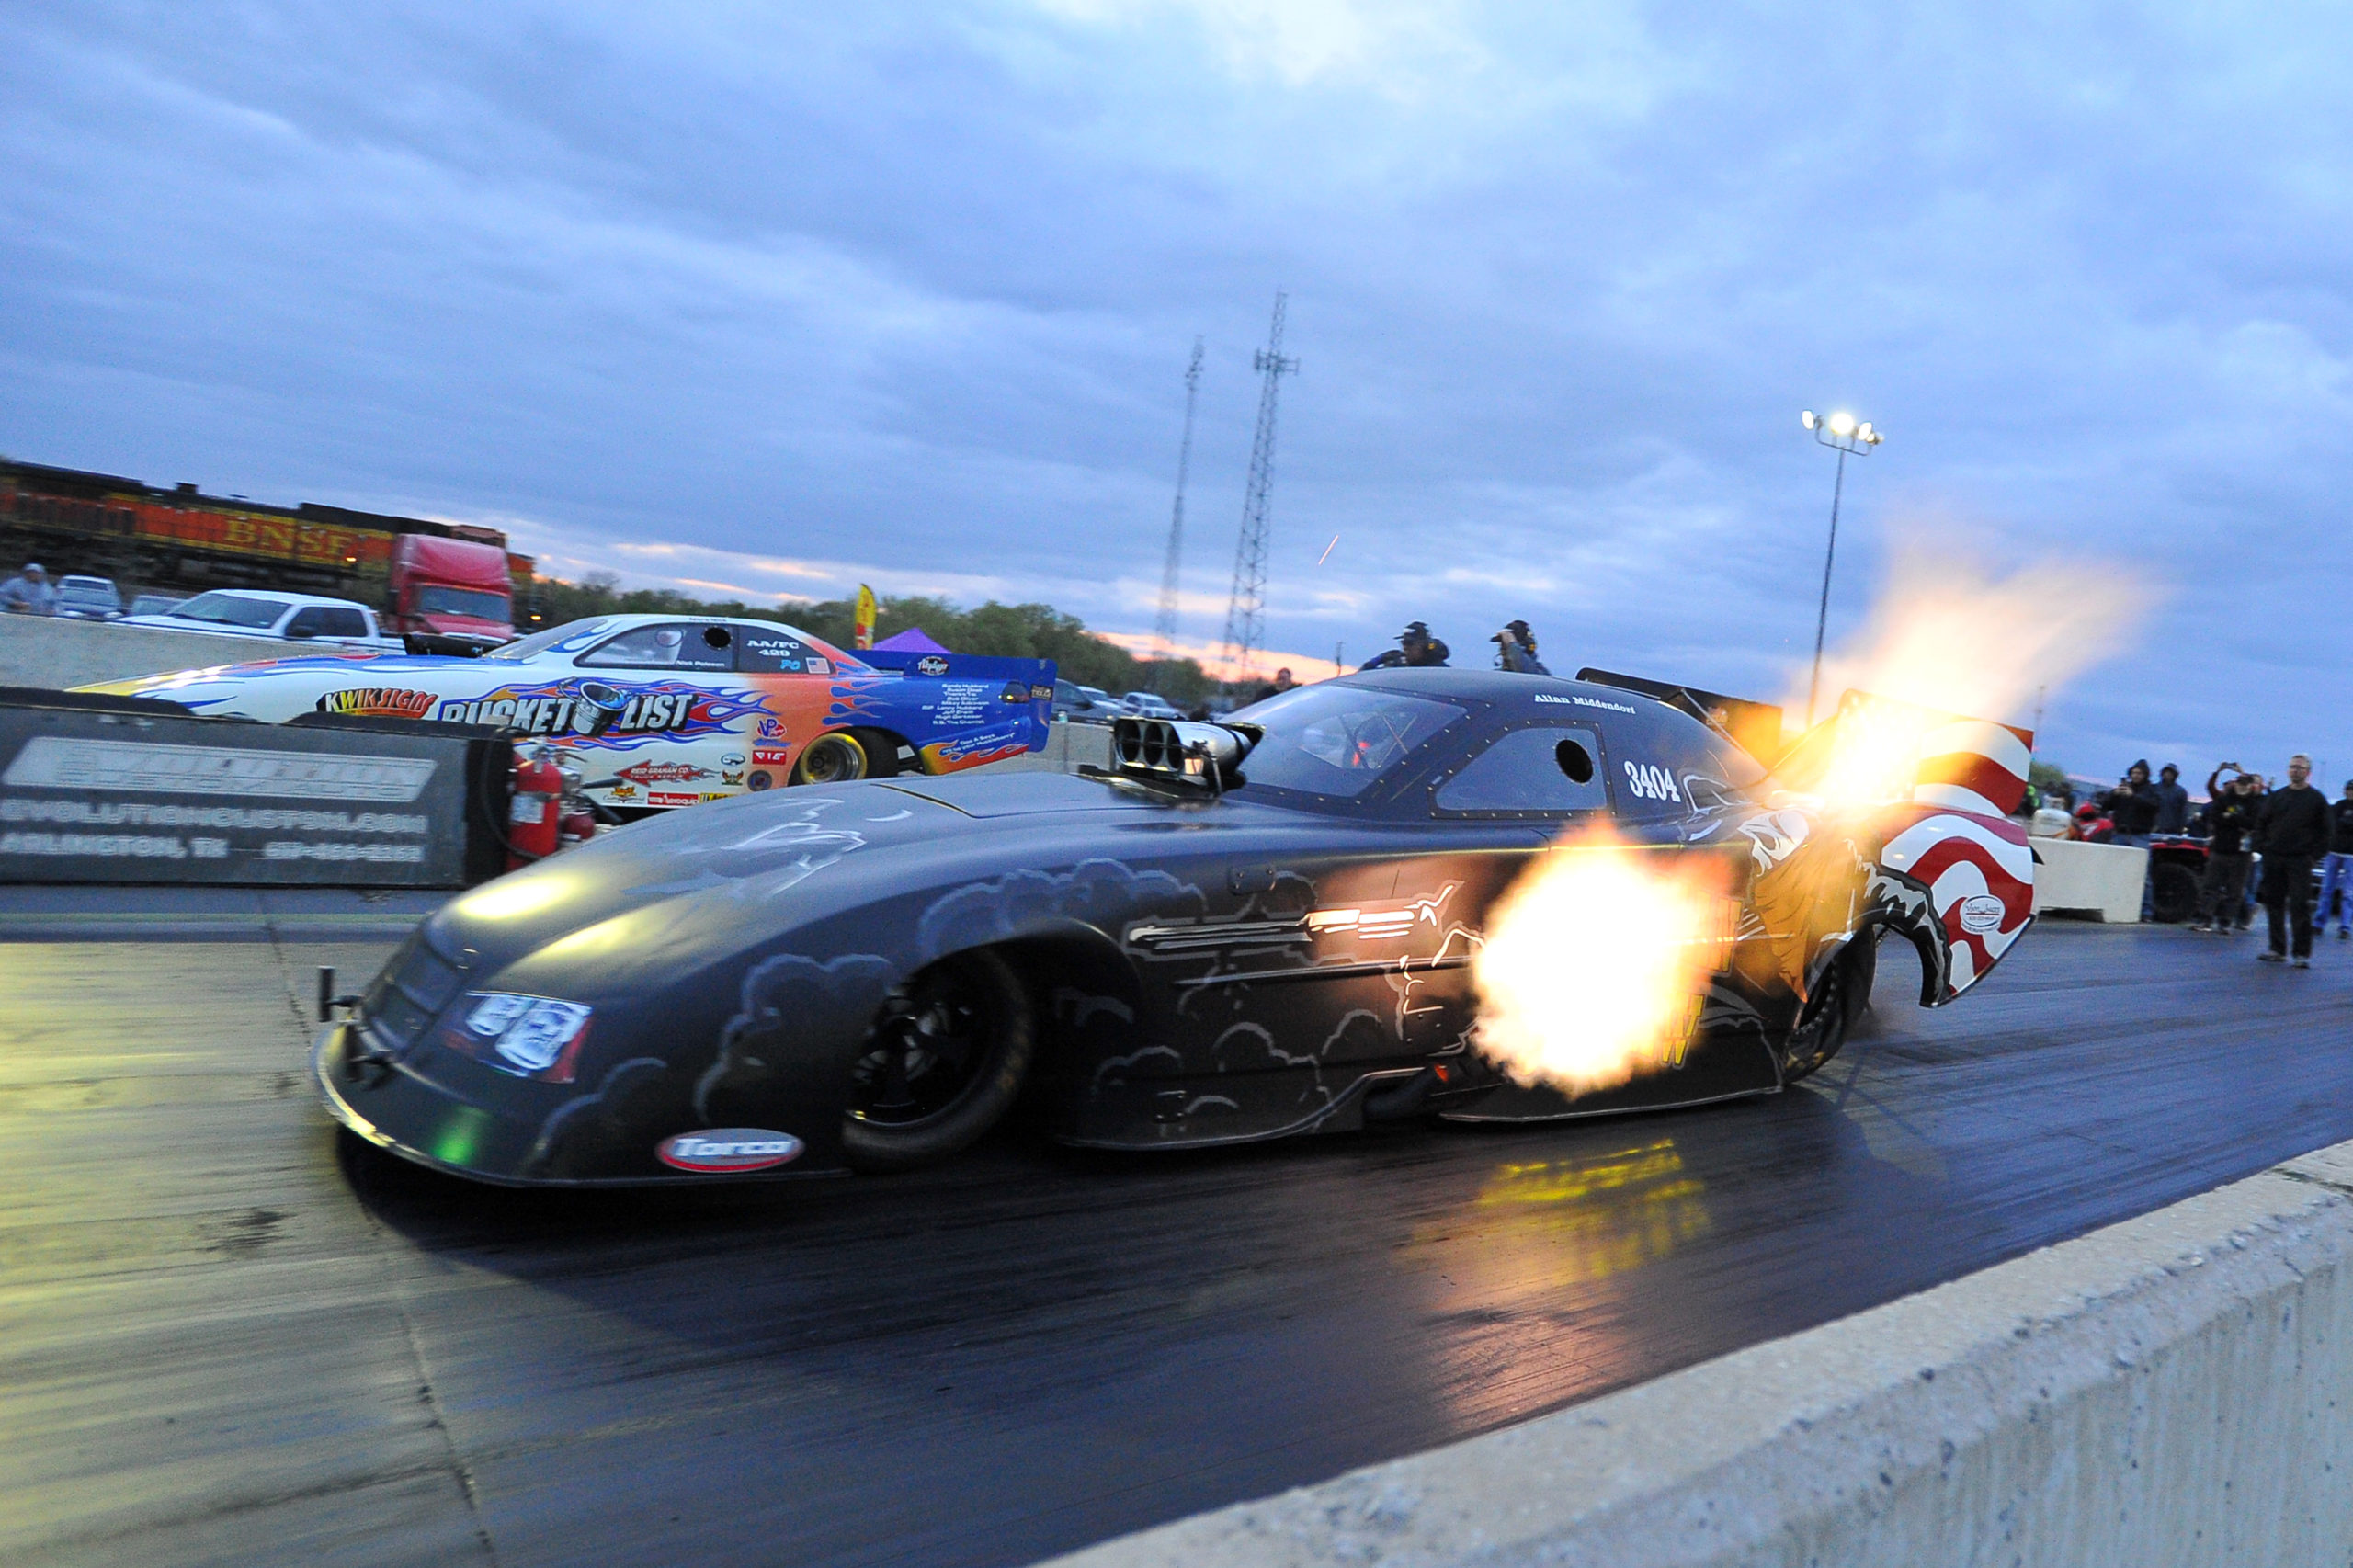 Organizing 'Chaos' - Chris Graves Leads Funny Car Chaos To Steady Growth -  Drag Illustrated | Drag Racing News, Opinion, Interviews, Photos, Videos  and More